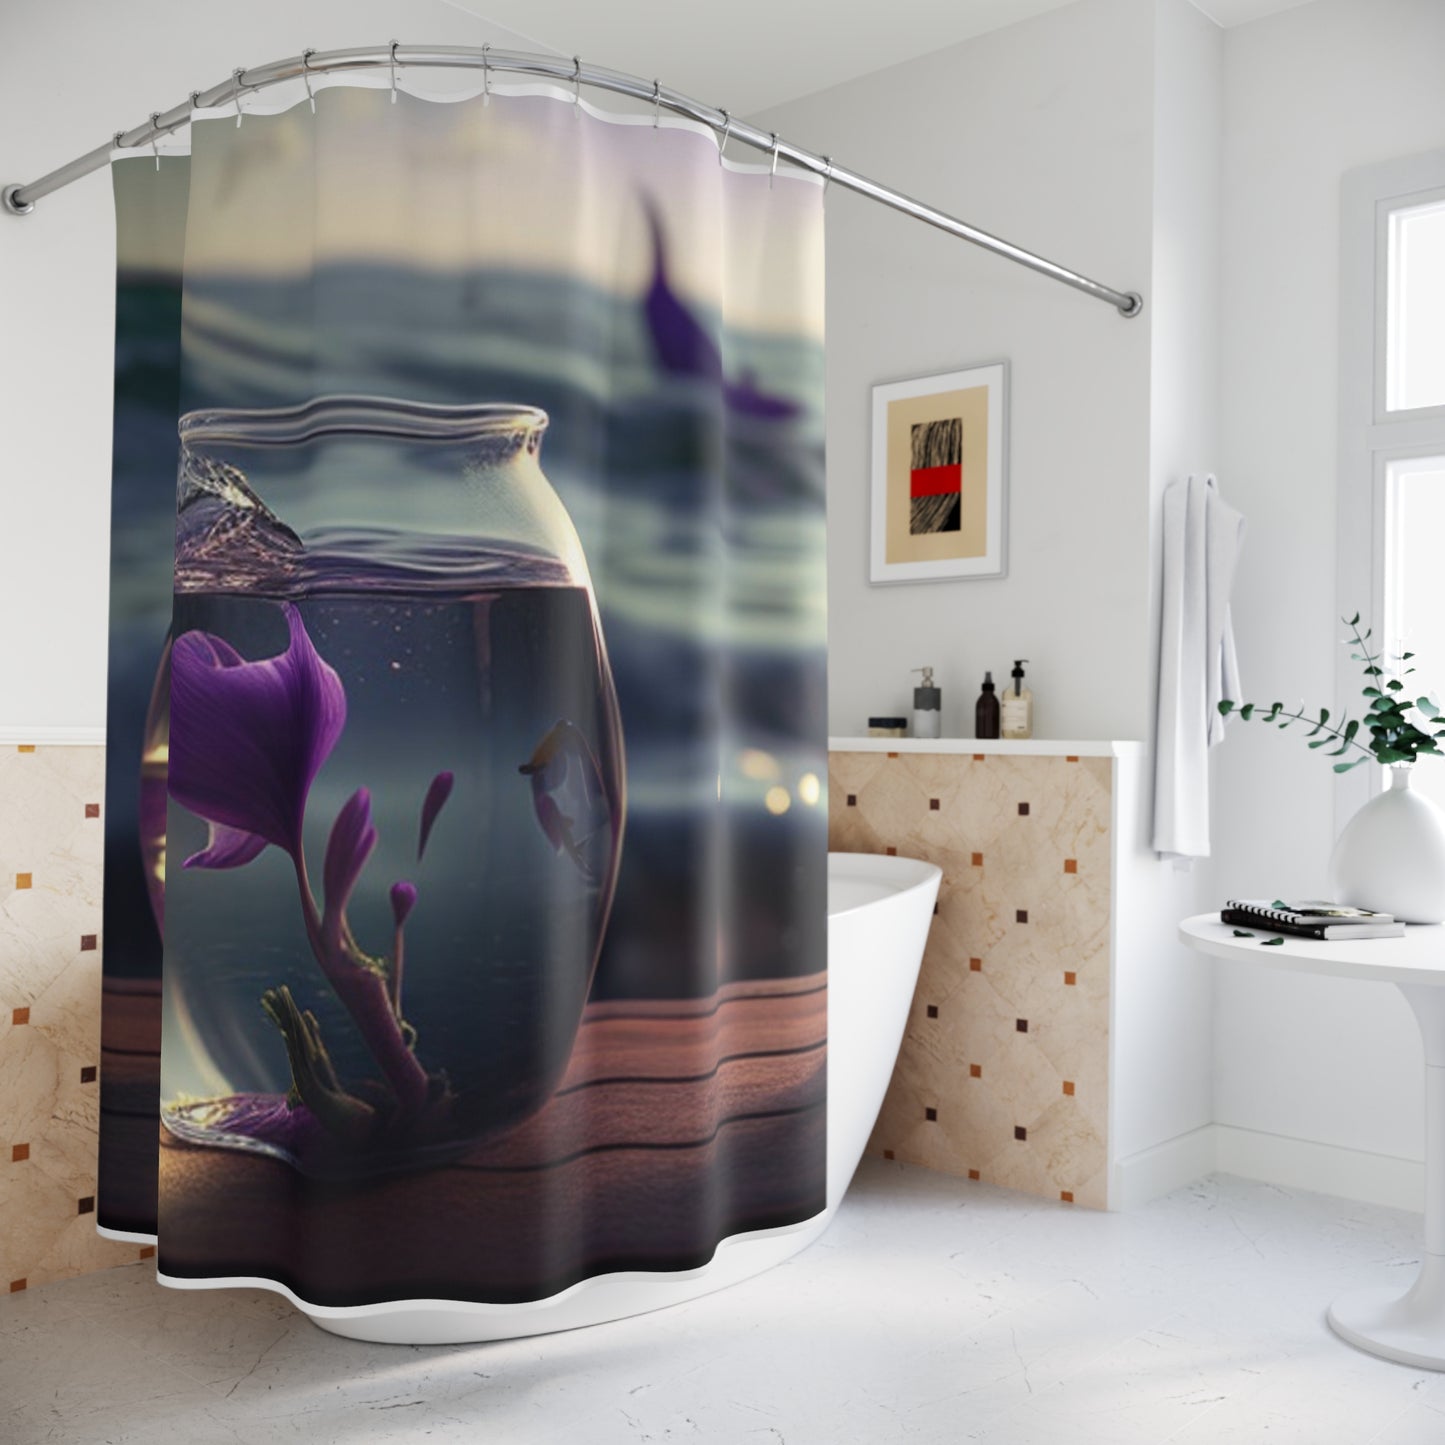 Polyester Shower Curtain Purple Sweet pea in a vase 1